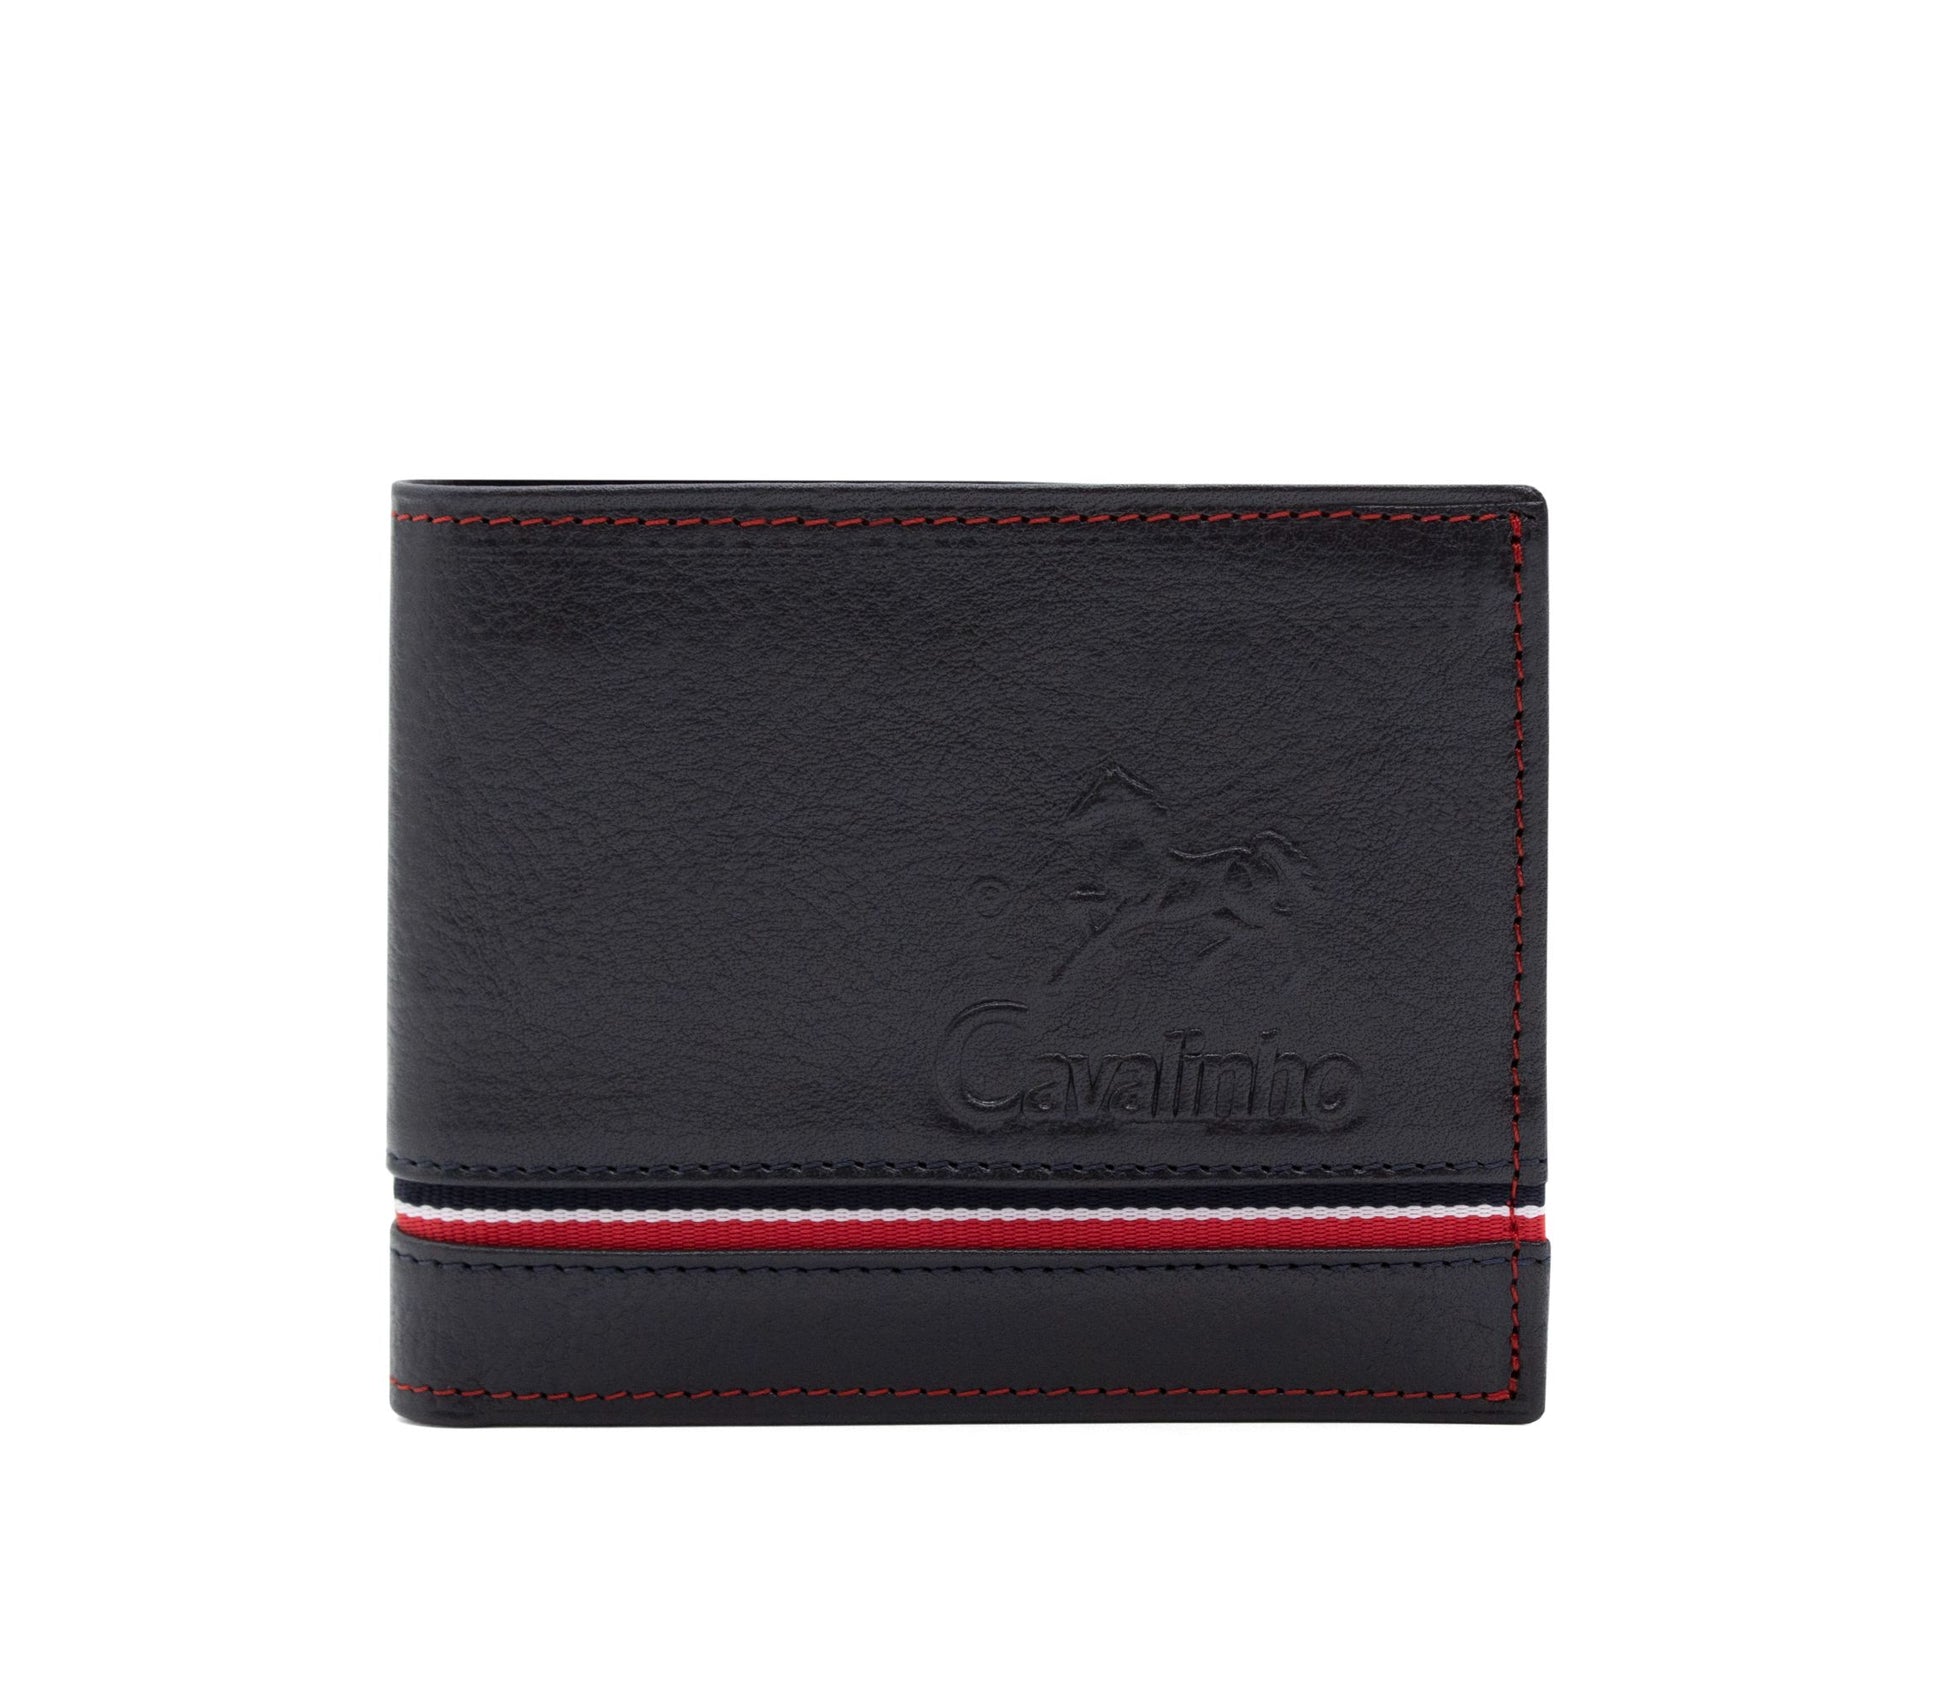 Cavalinho The Sailor Trifold Leather Wallet - Navy - 28150508.22_1